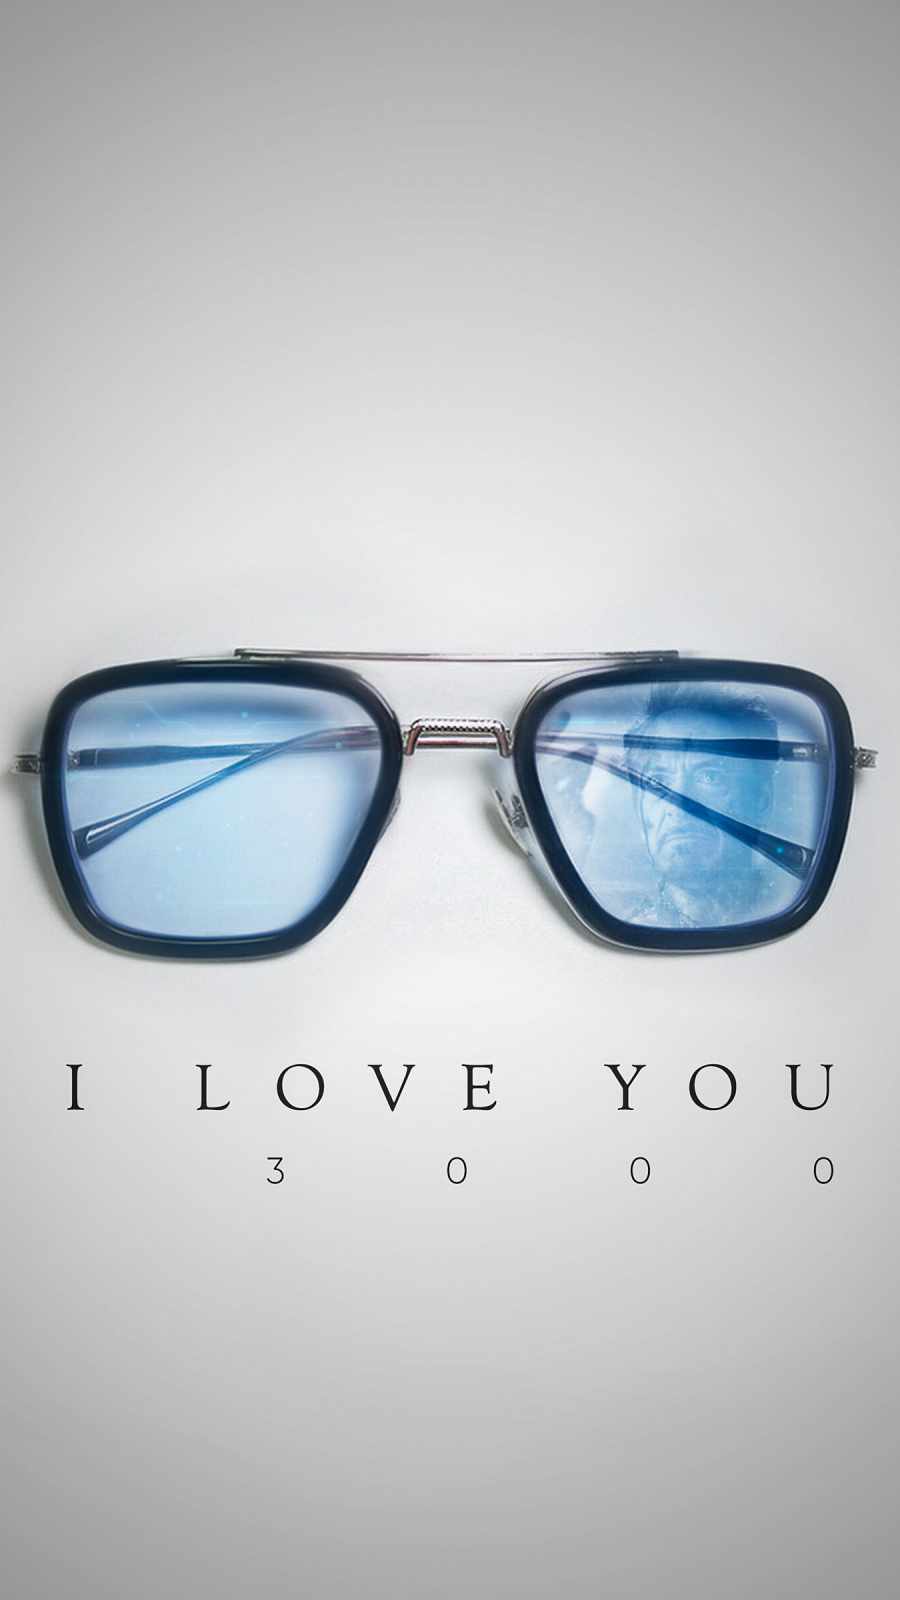 I Love You 3K IPhone Wallpaper - IPhone Wallpapers : iPhone Wallpapers